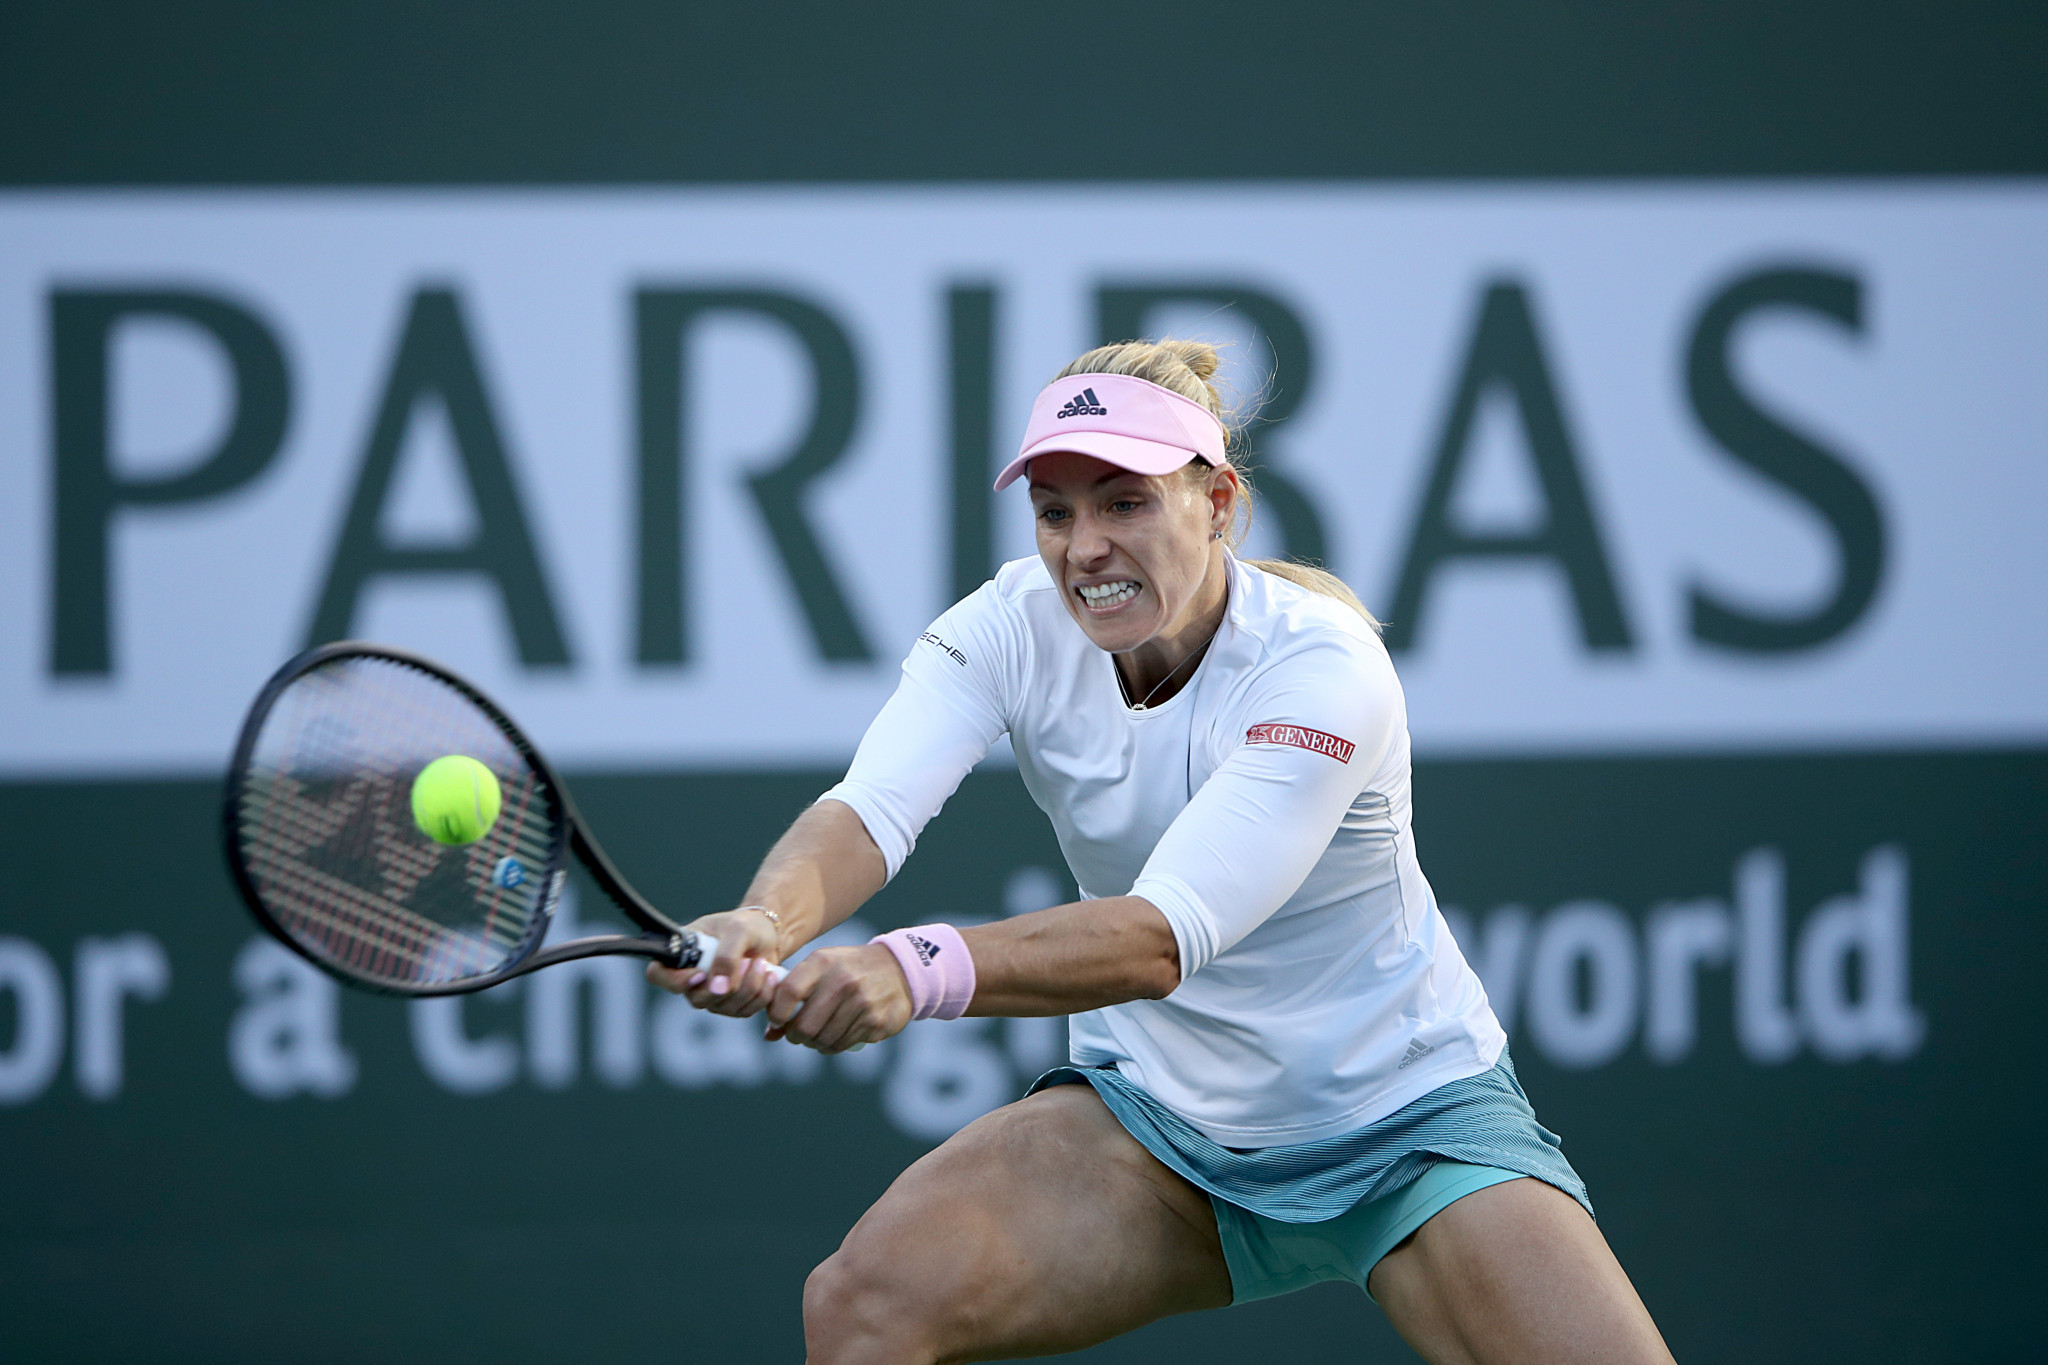 Kerber beats Williams to reach Indian Wells semi-finals as injury forces Monfils out of men’s event